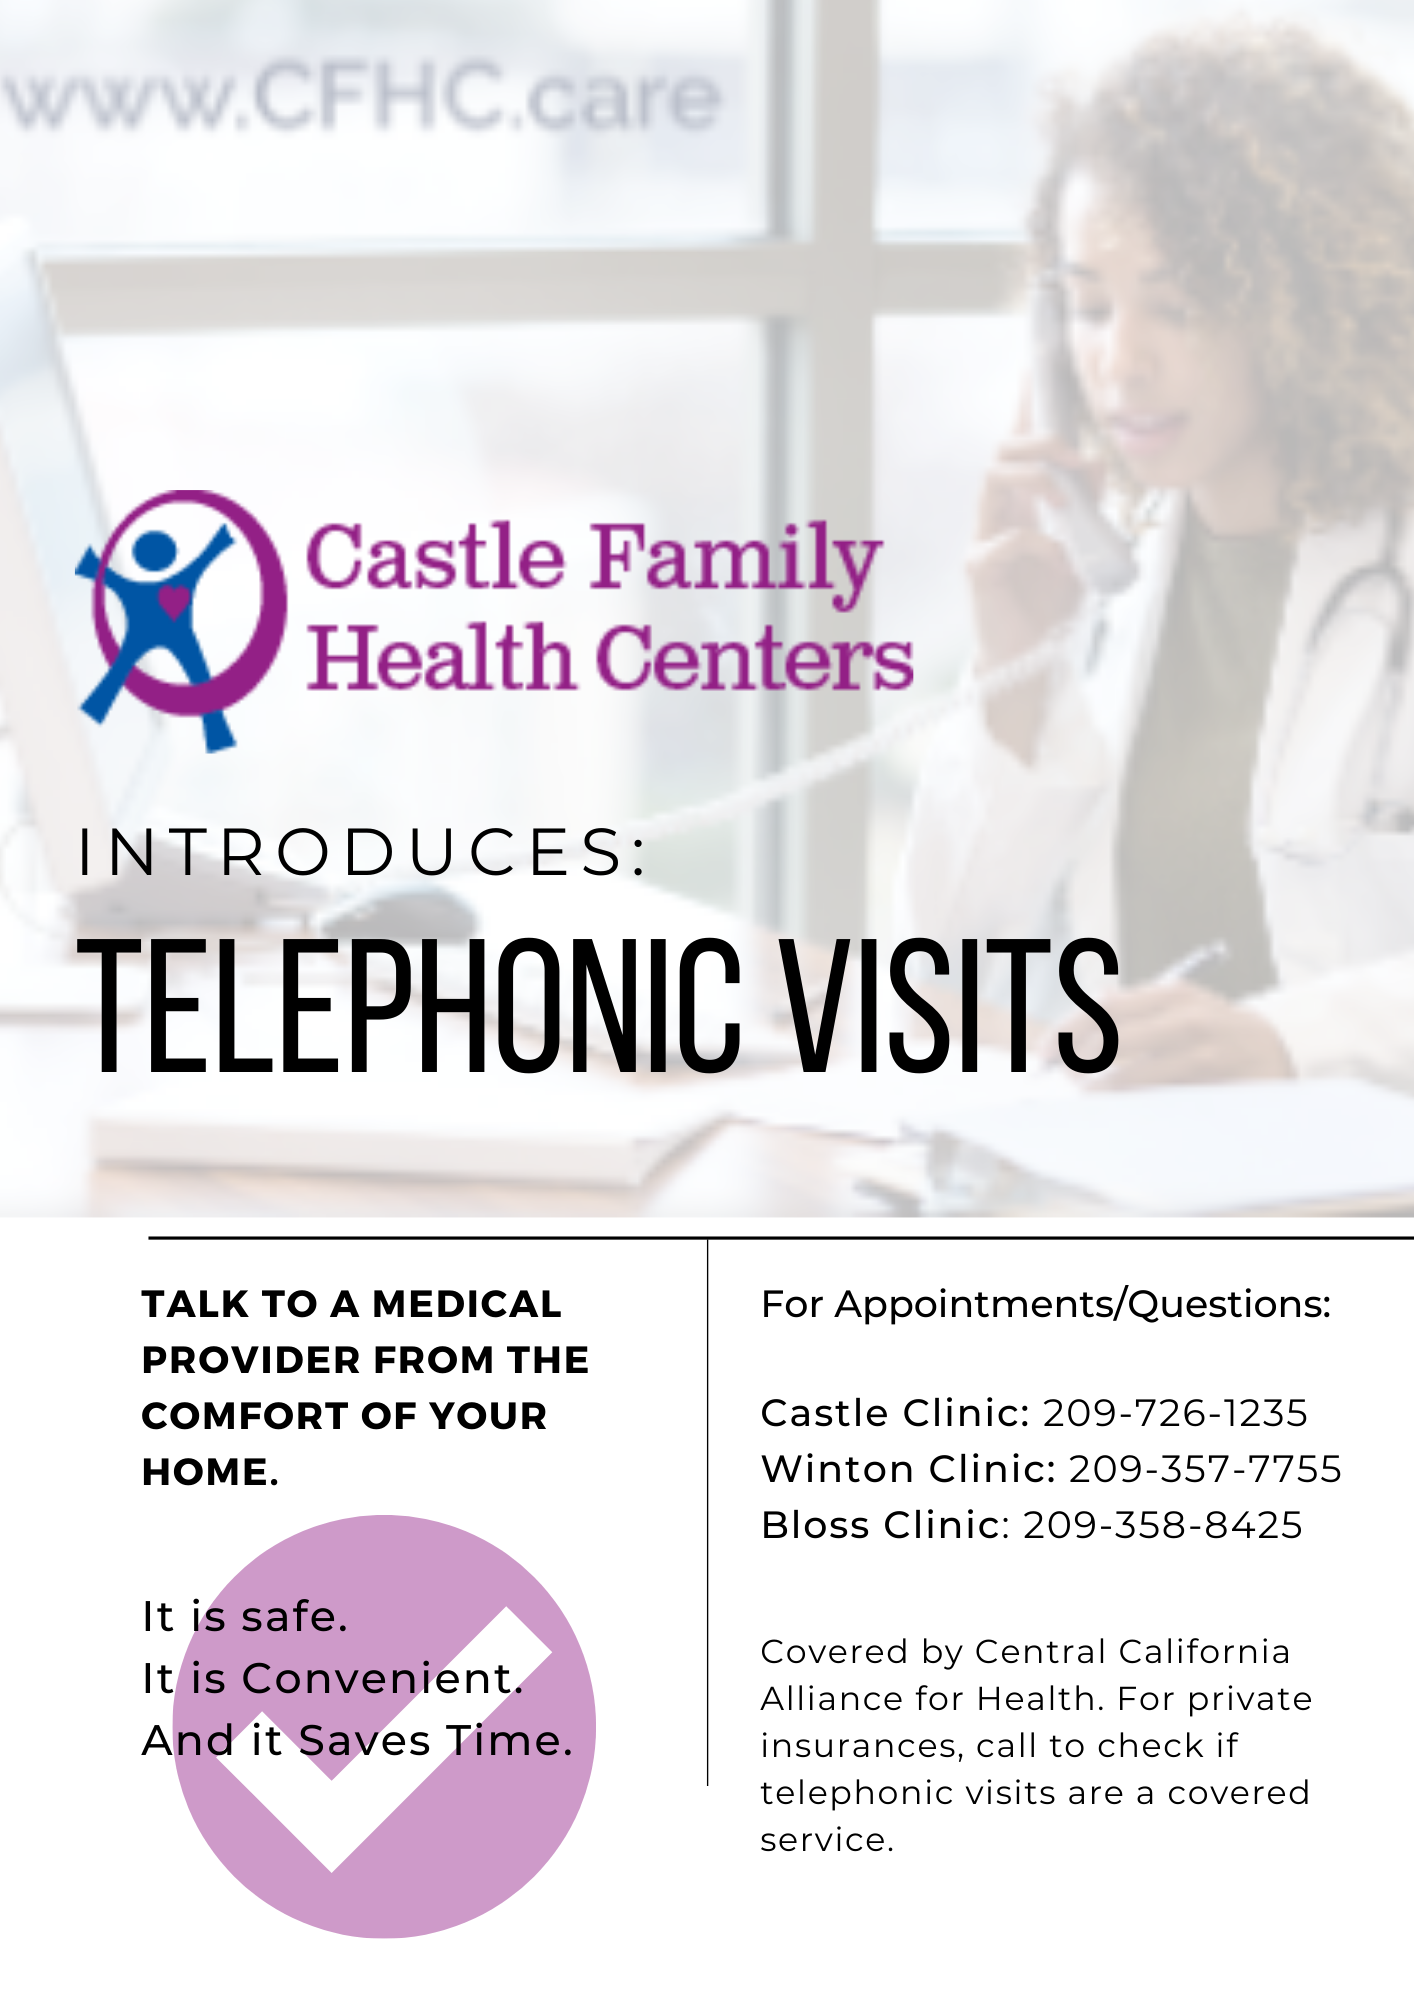 telephonic visits now available, call us today.